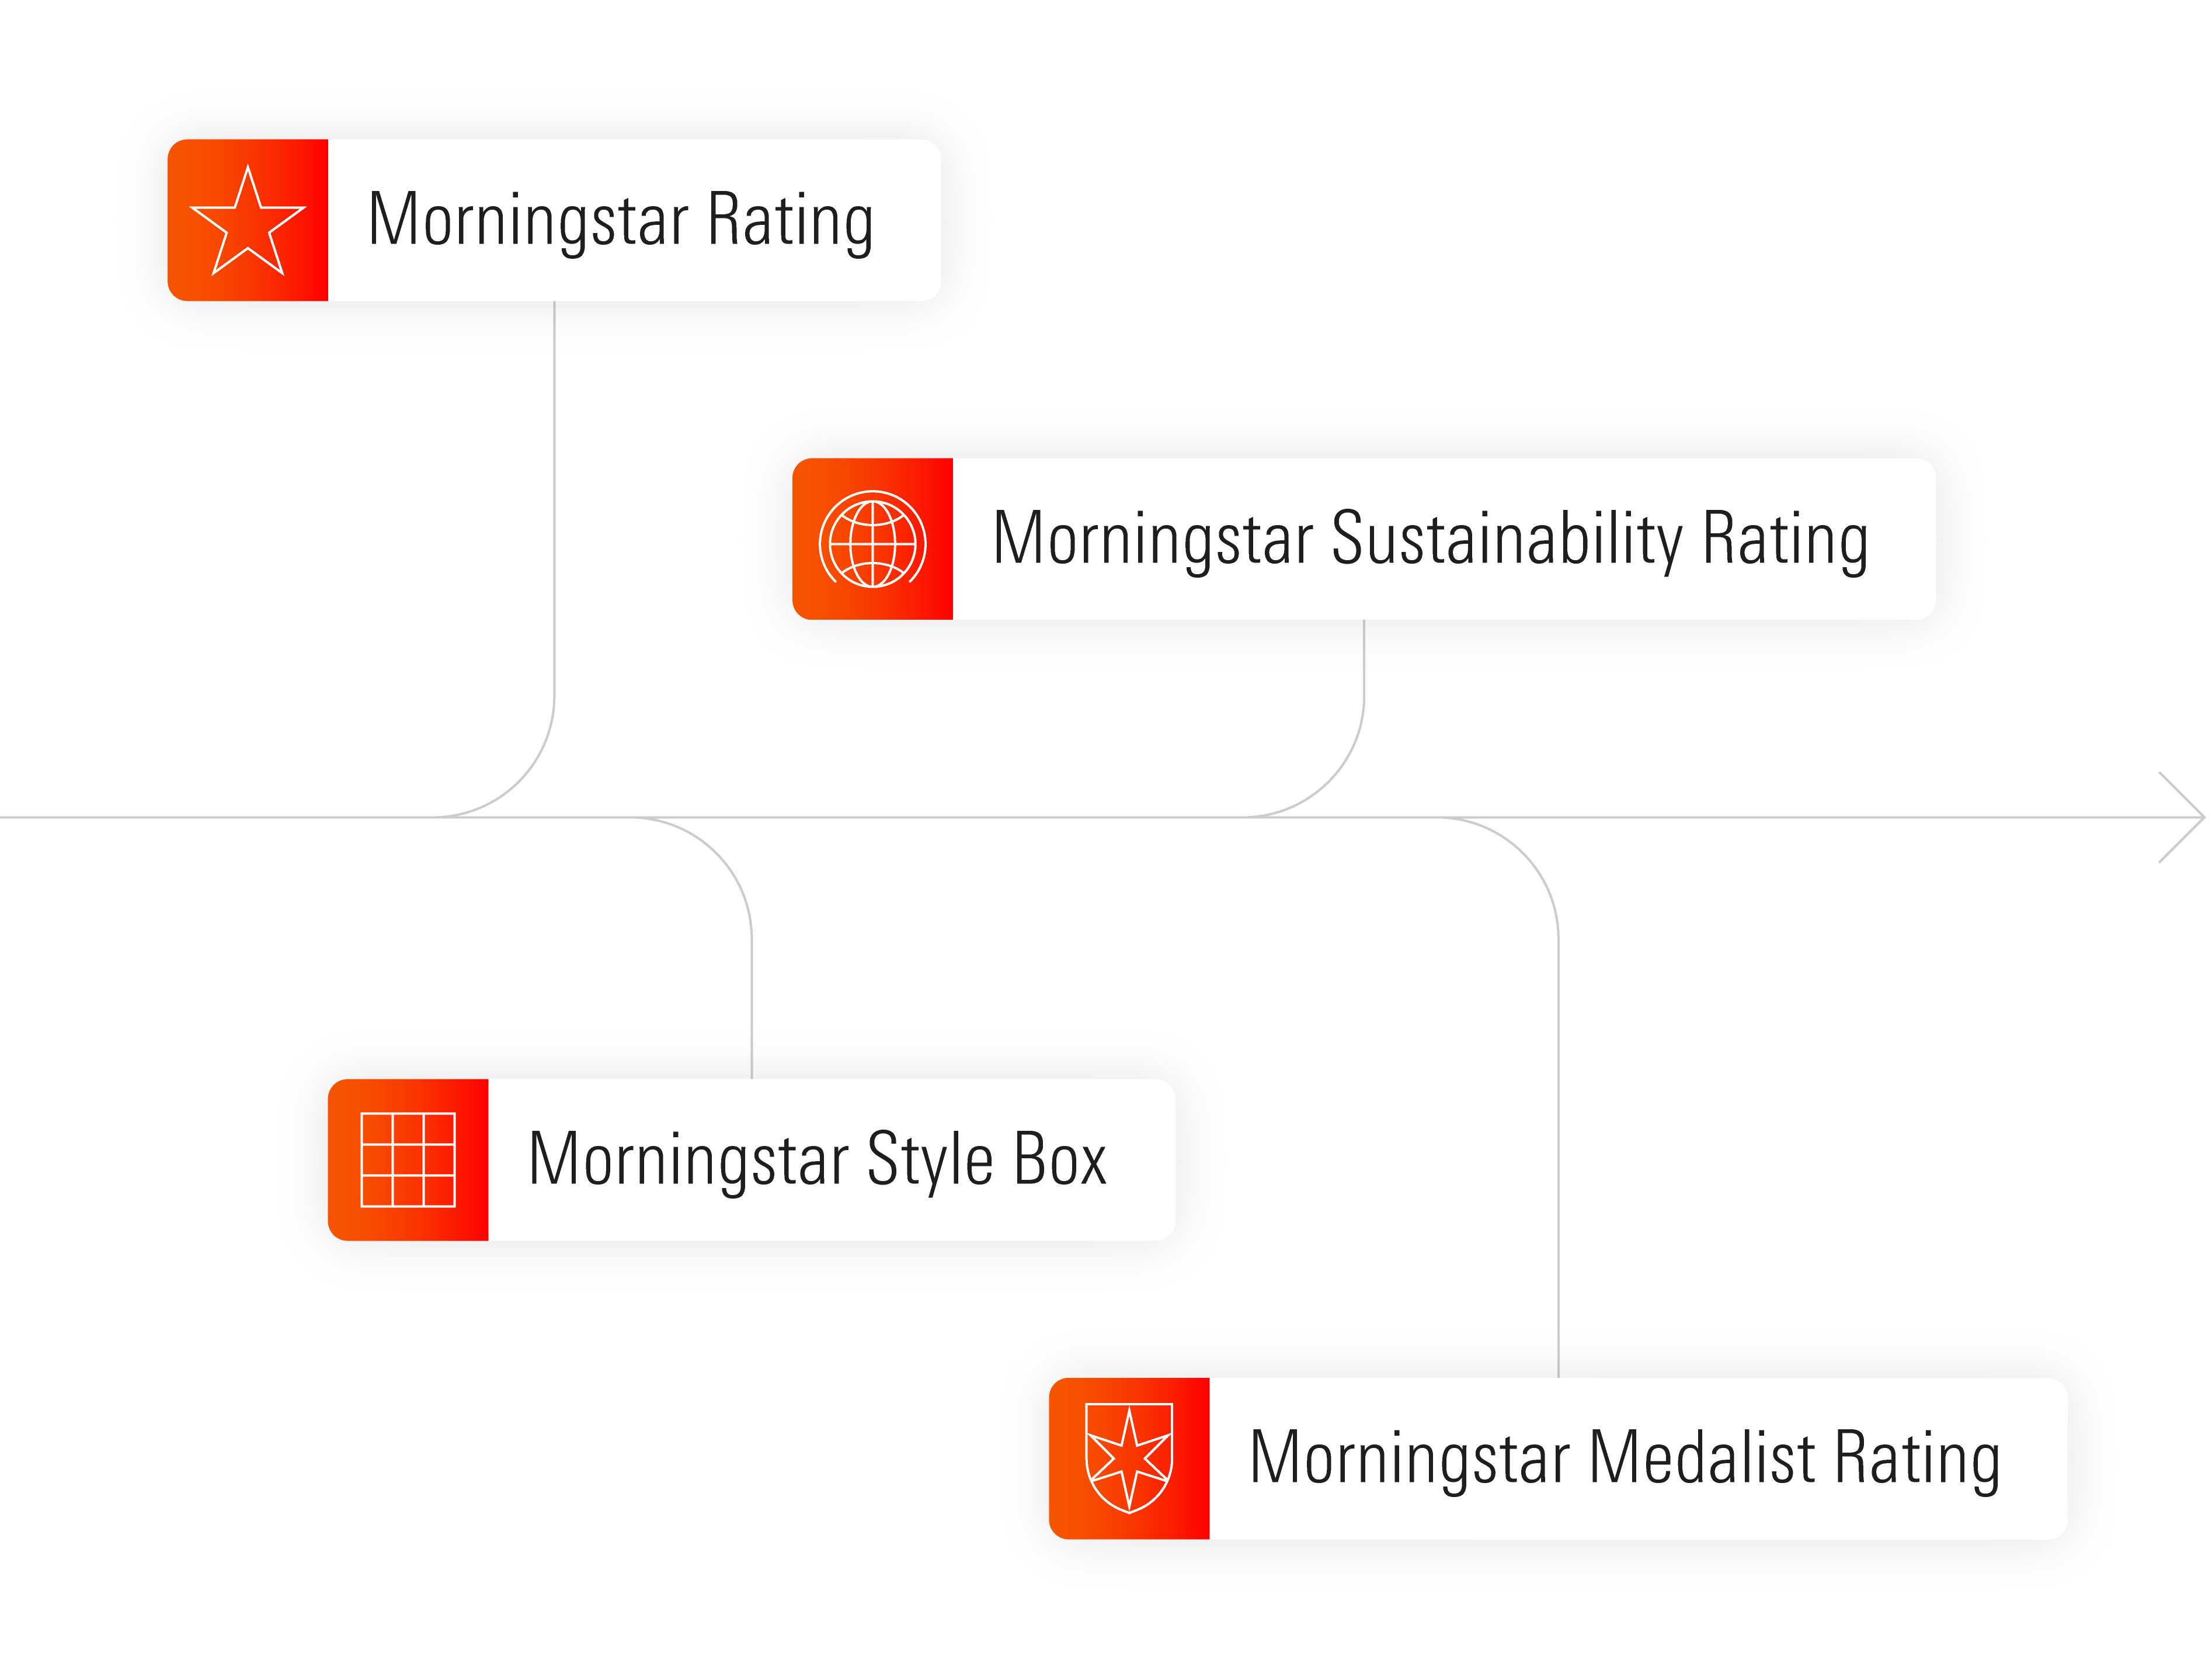 Timeline of Morningstar investment ratings, from left to right: Star Rating, Style Box, Sustainability Rating, Medalist Rating.